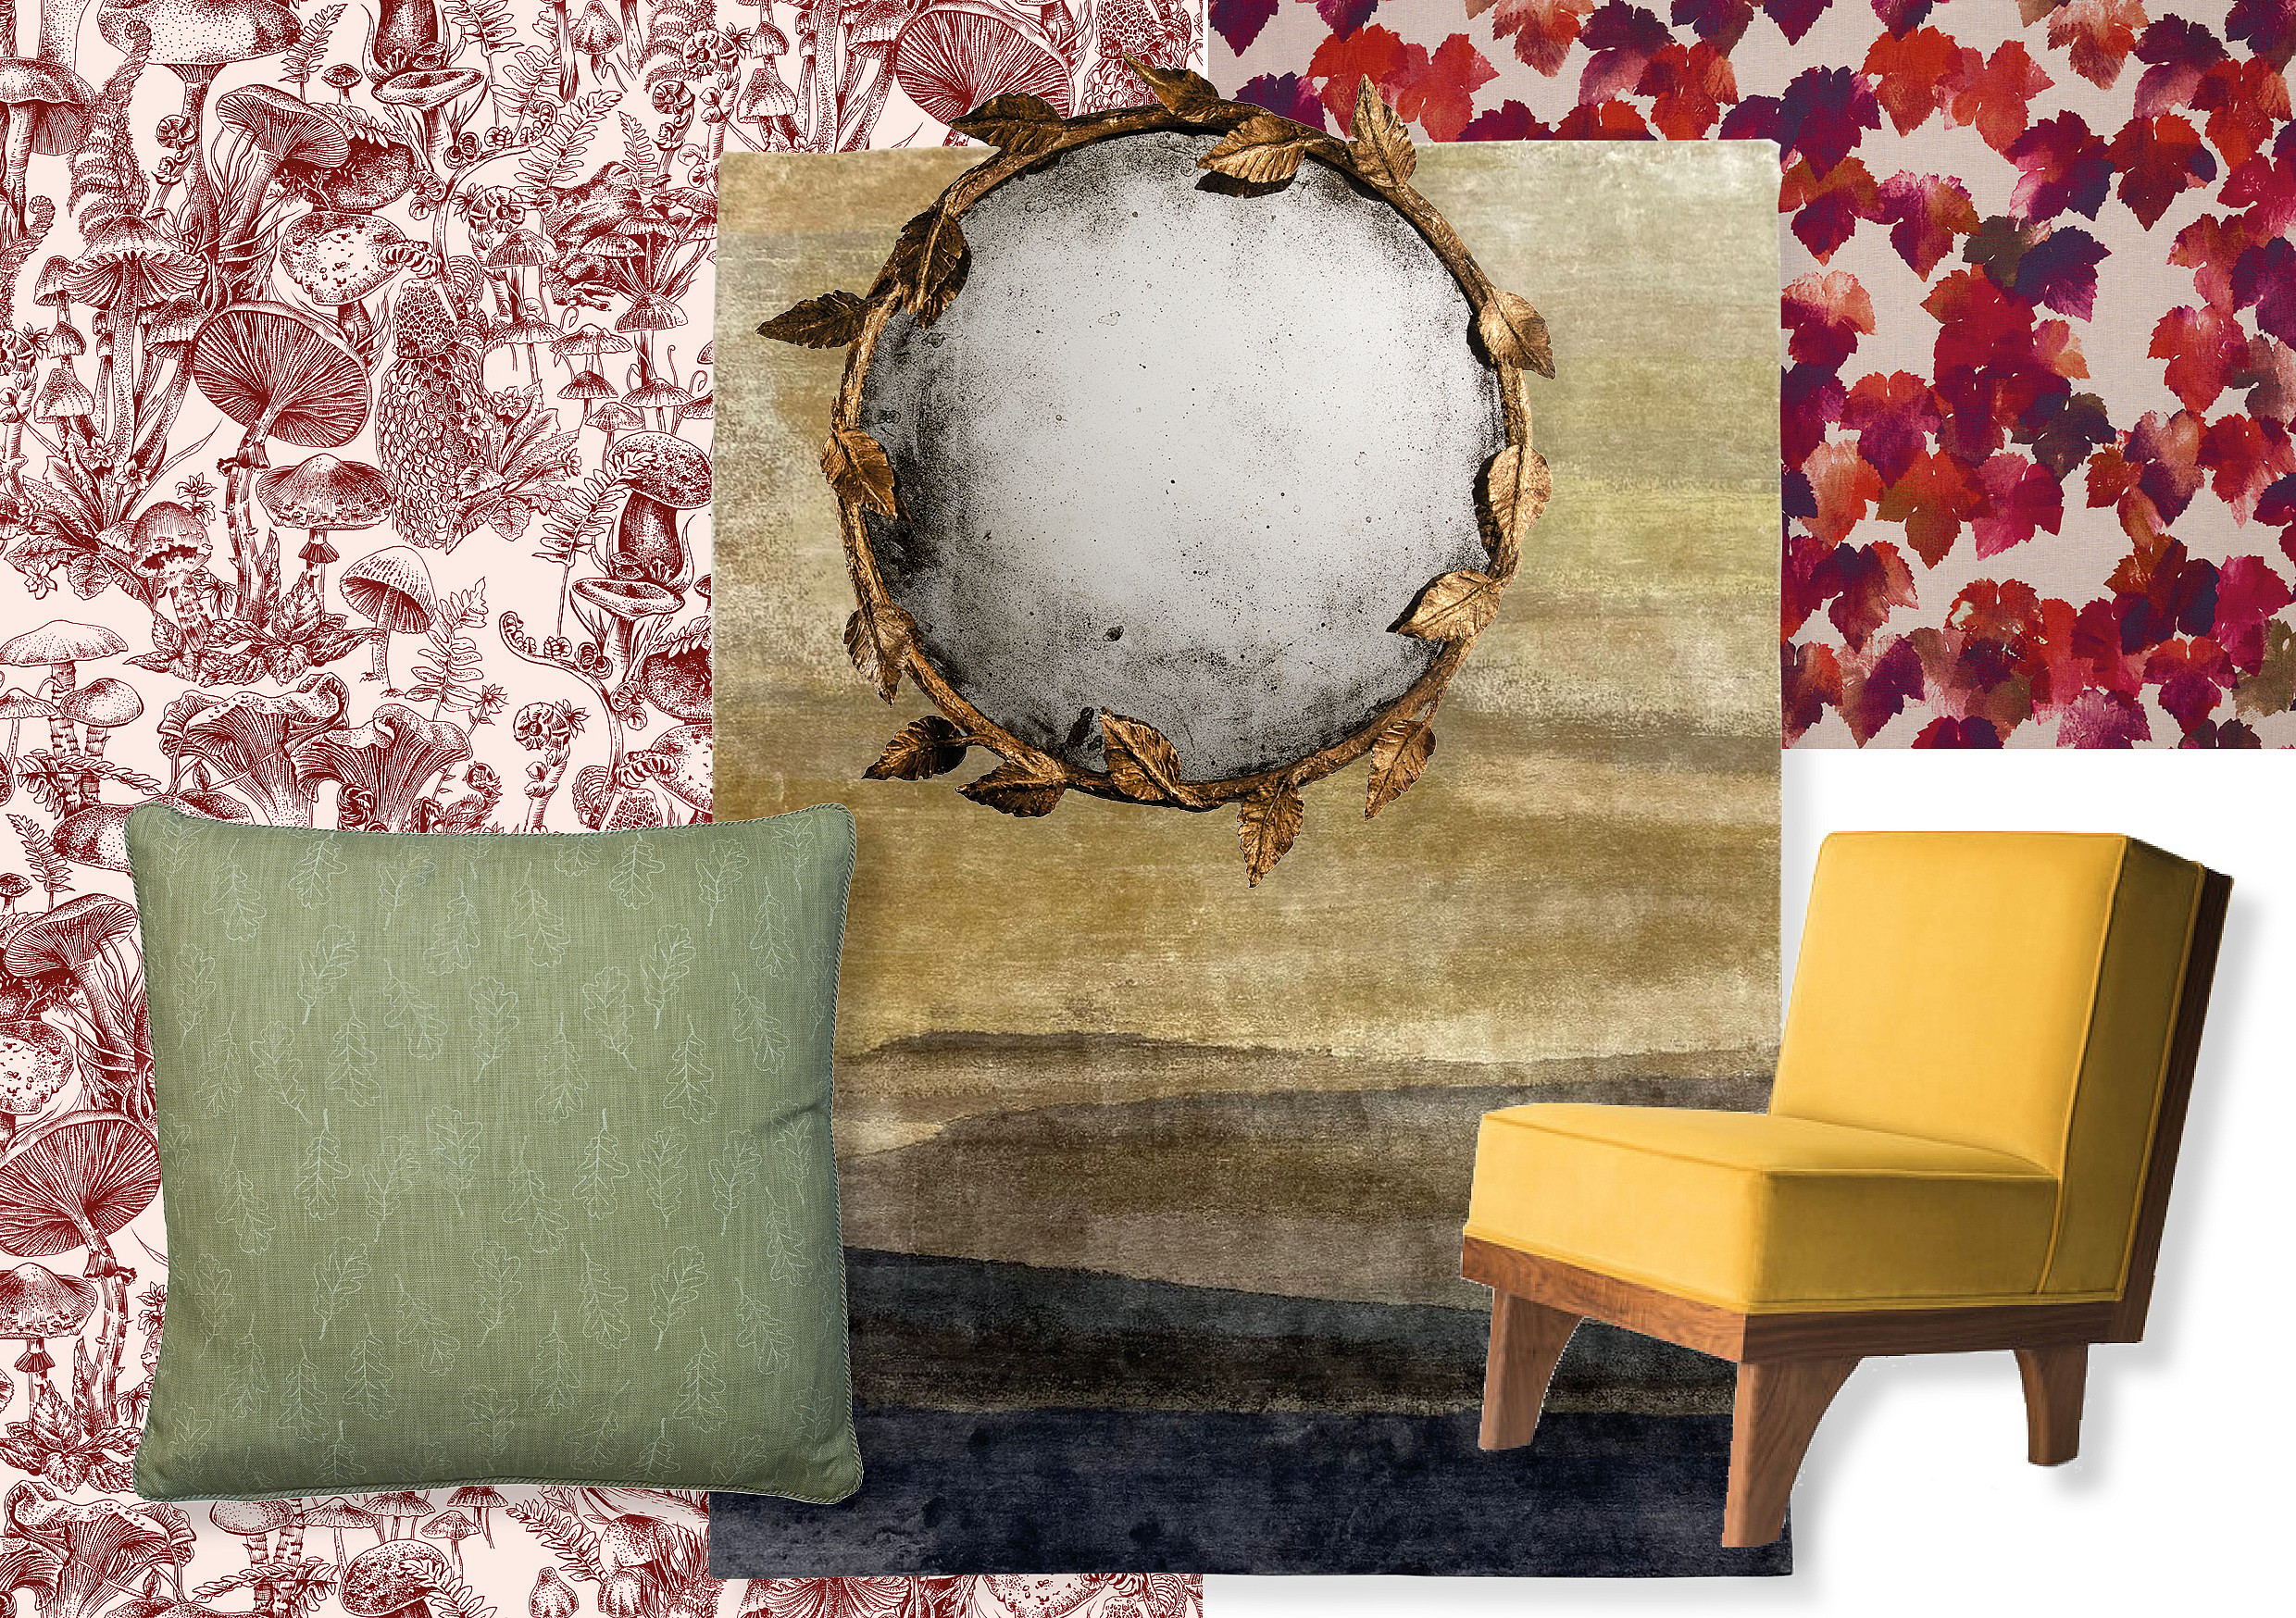 A moodboard showing interiors products inspired by nature in autumn